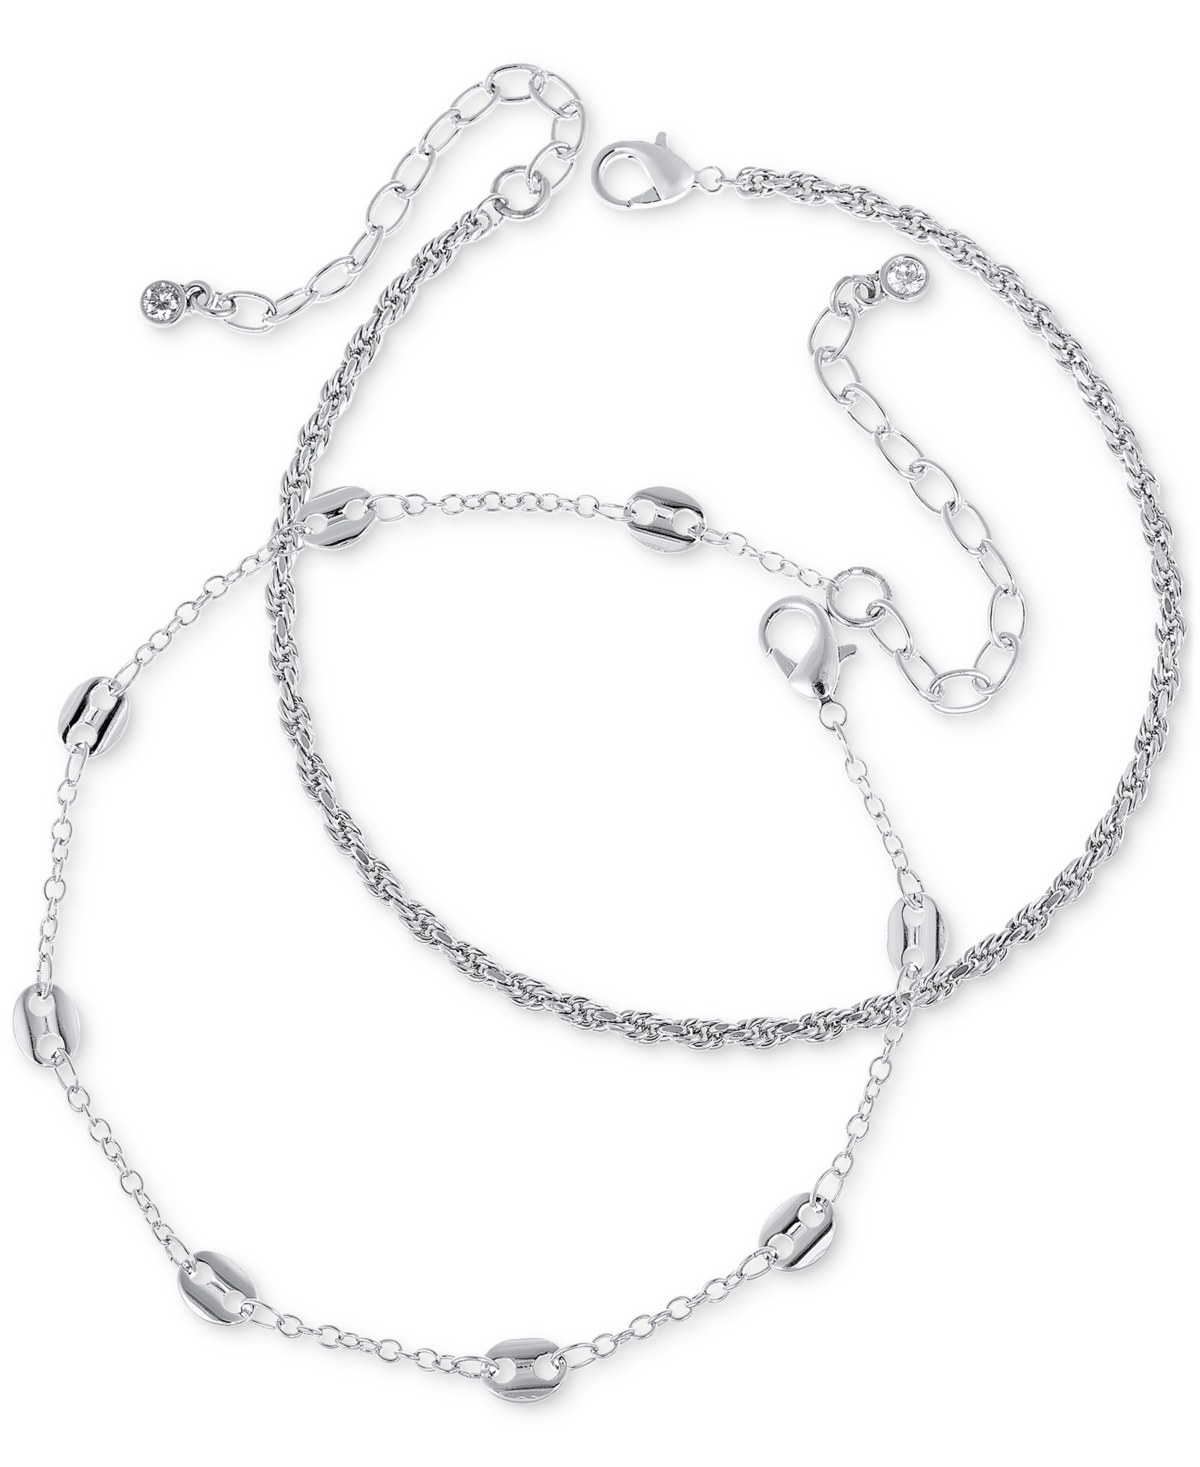 2-Pc. Set Mariner Link & Twist Chain Anklet, Created for Macy's - Silver